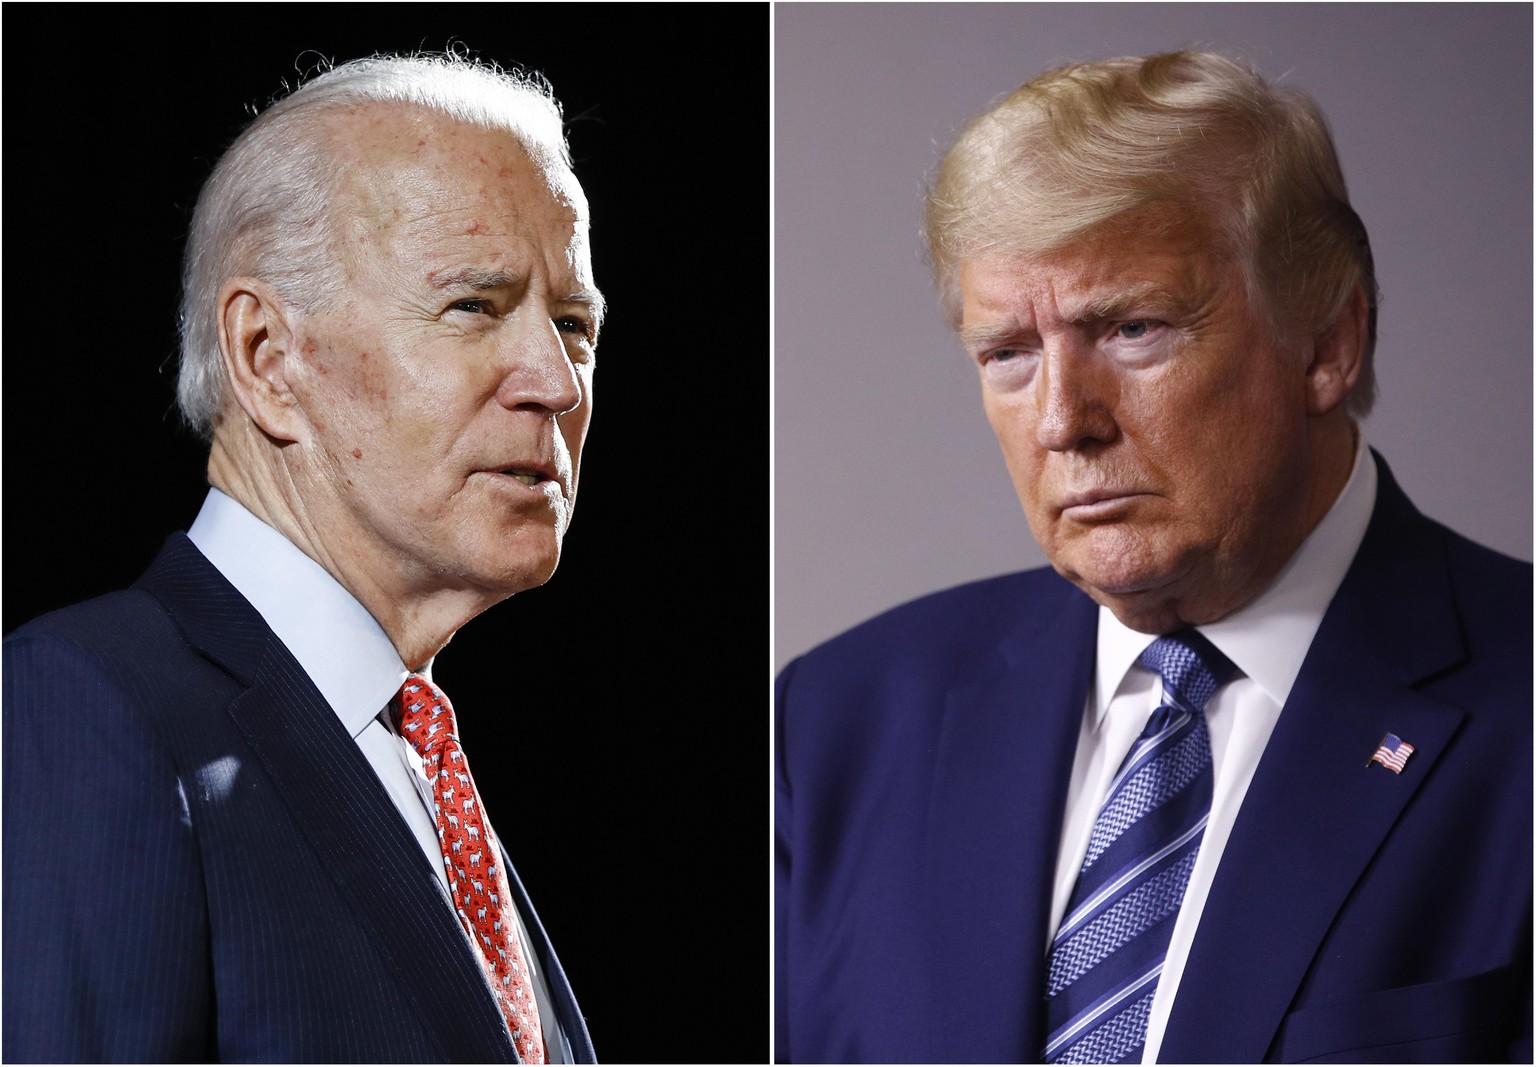 FILE - In this combination of file photos, former Vice President Joe Biden speaks in Wilmington, Del., on March 12, 2020, left, and President Donald Trump speaks at the White House in Washington on Ap ...